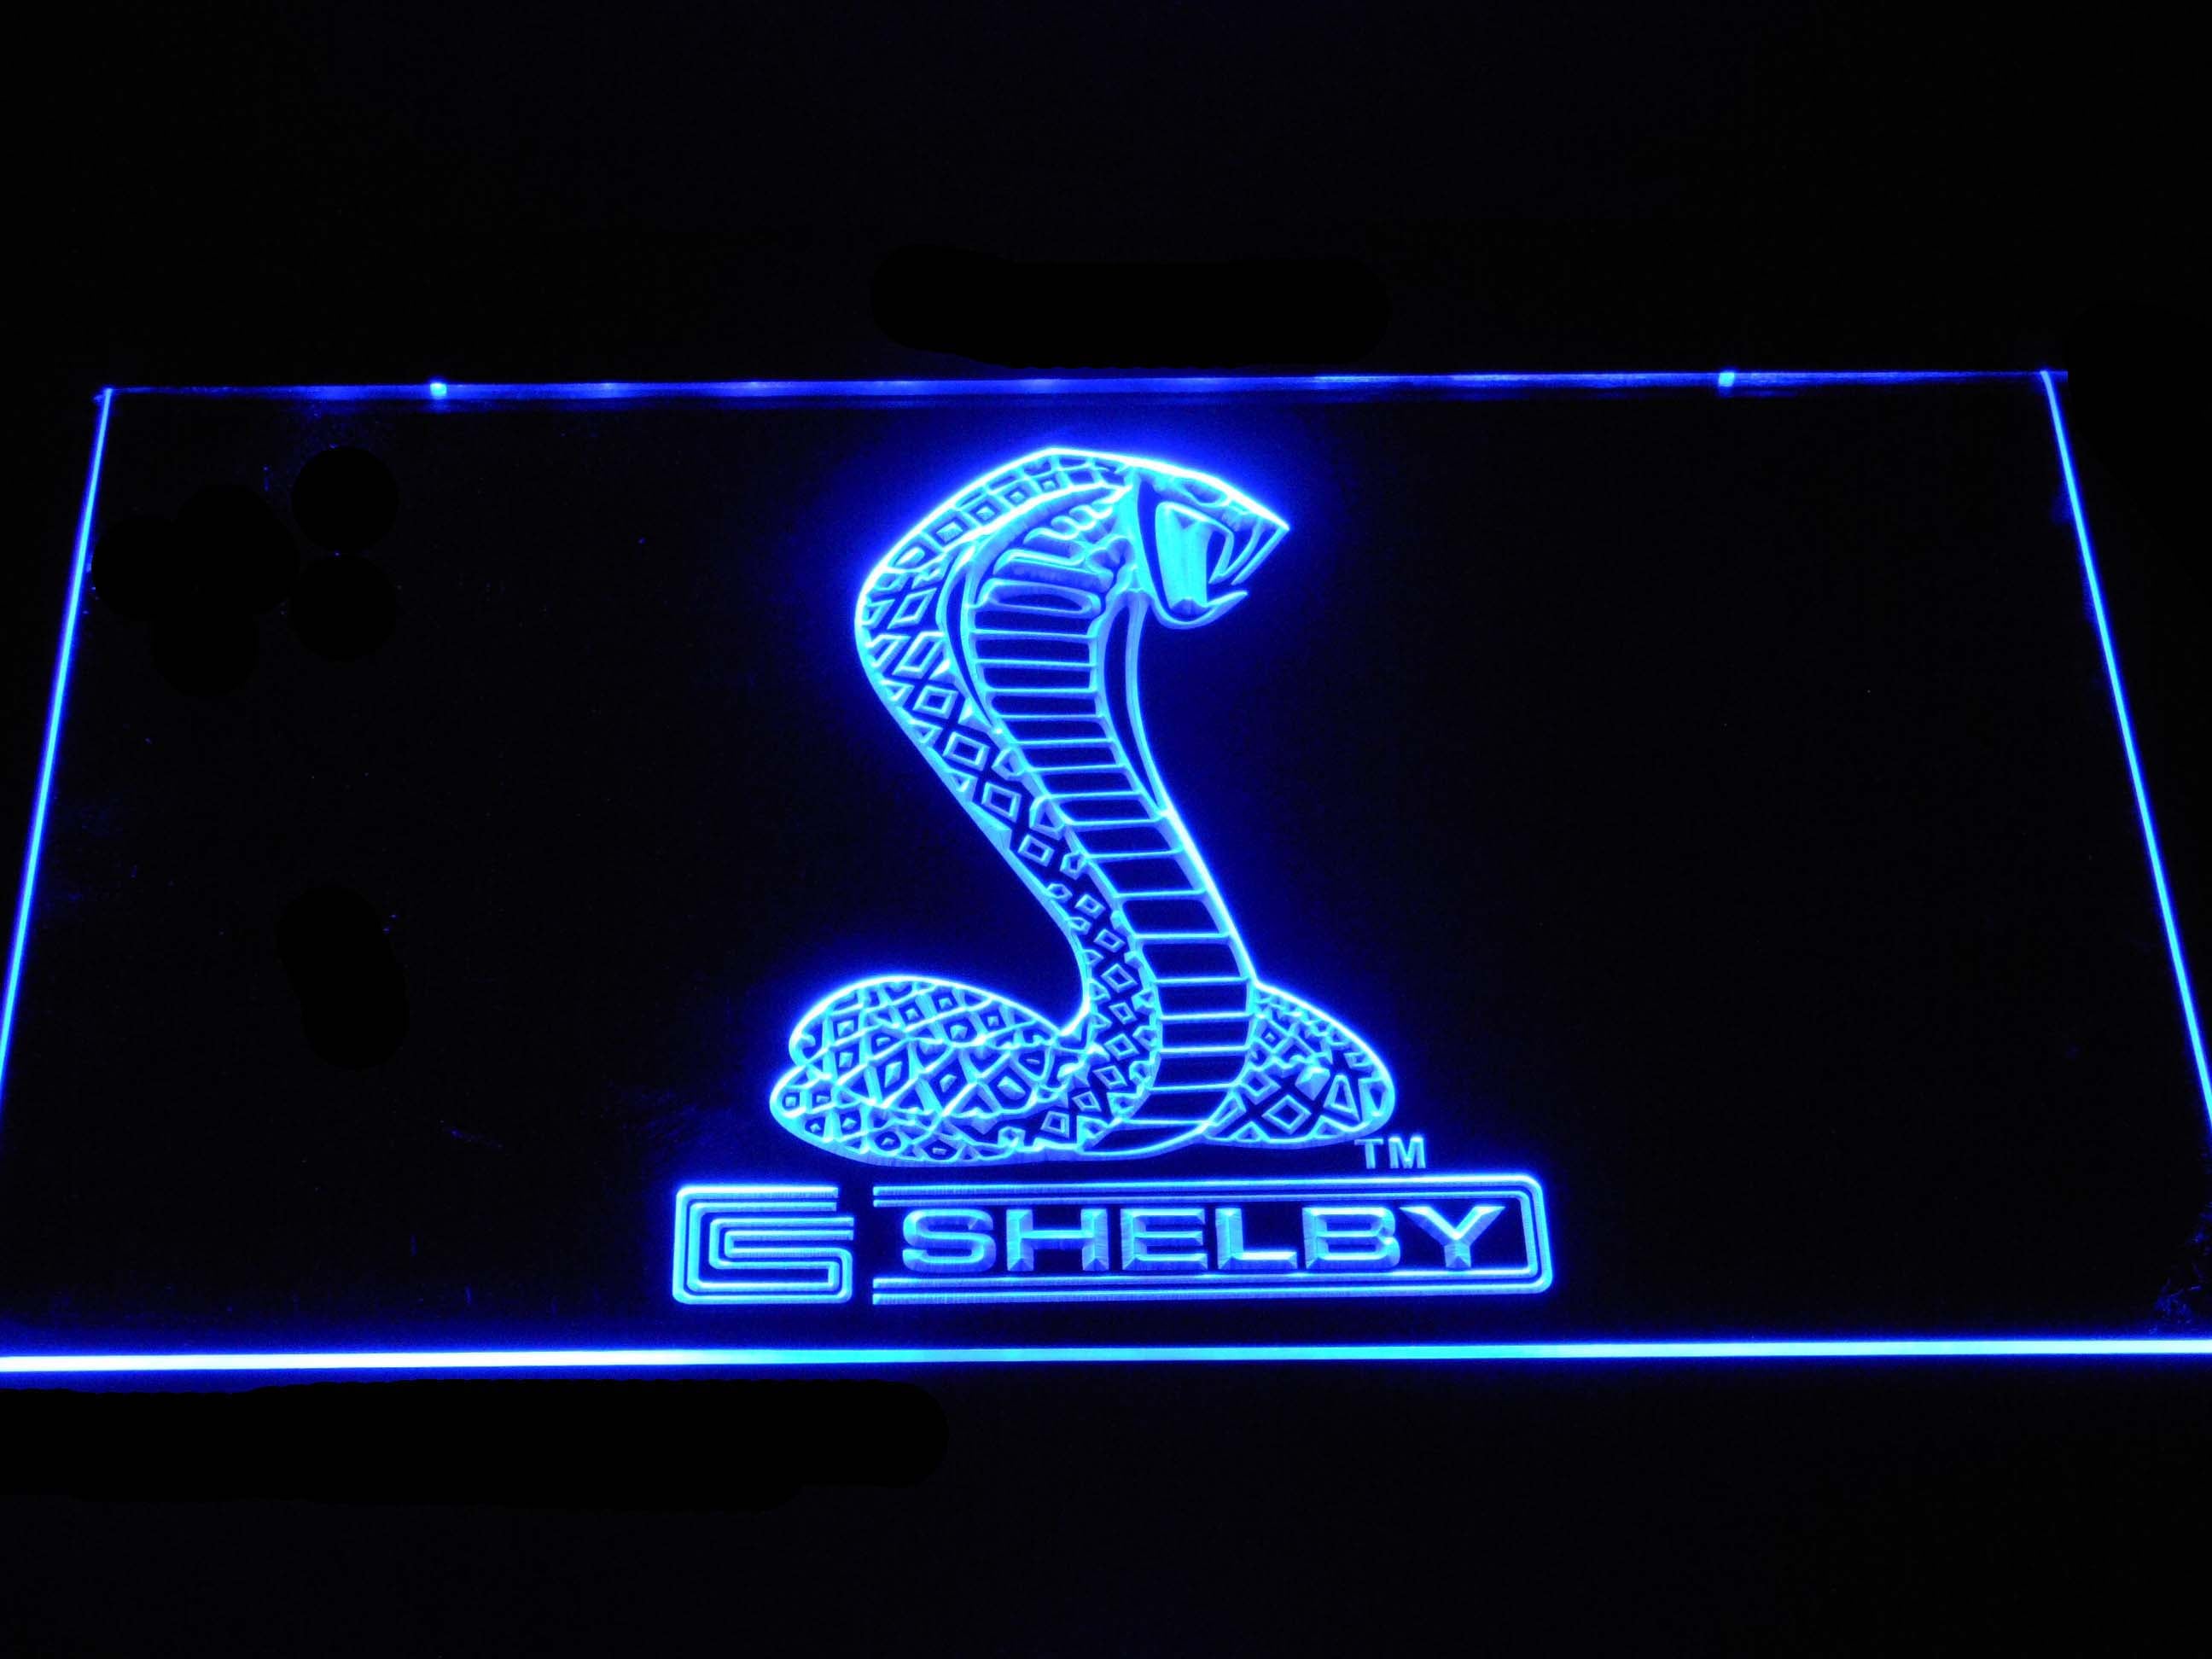 Ford Shelby Neon LED Light Sign